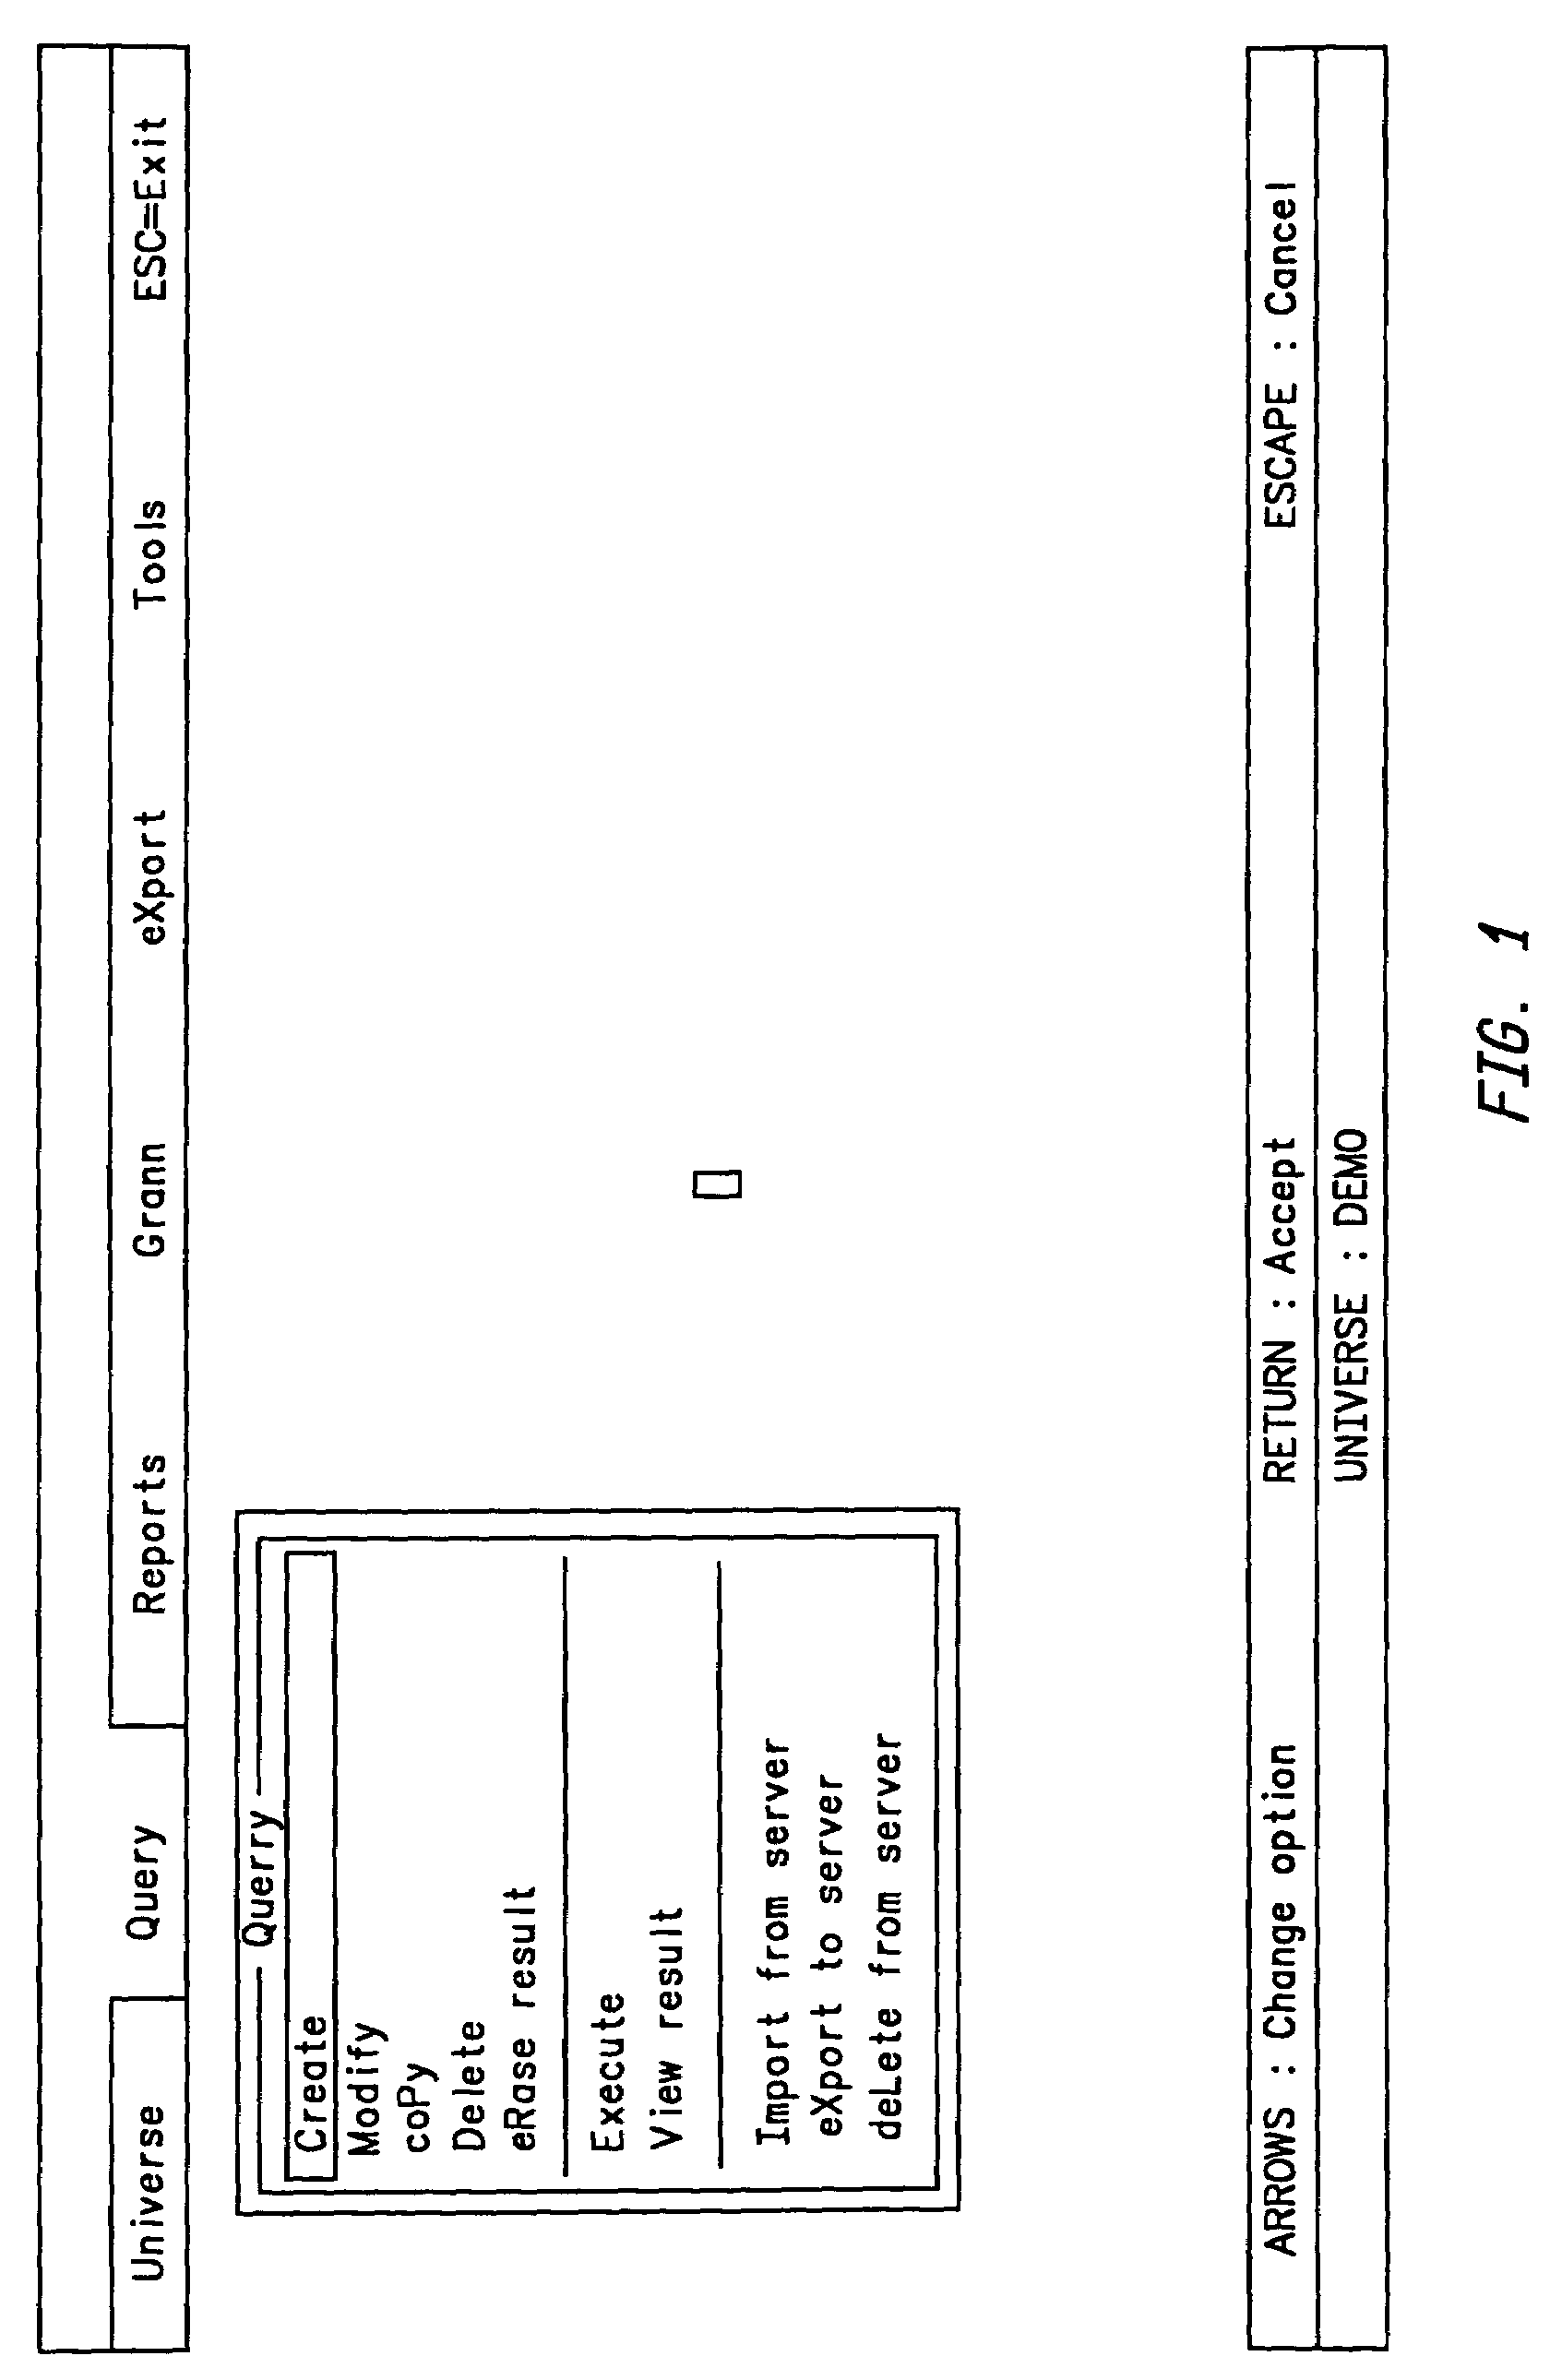 Relational database access system using semantically dynamic objects